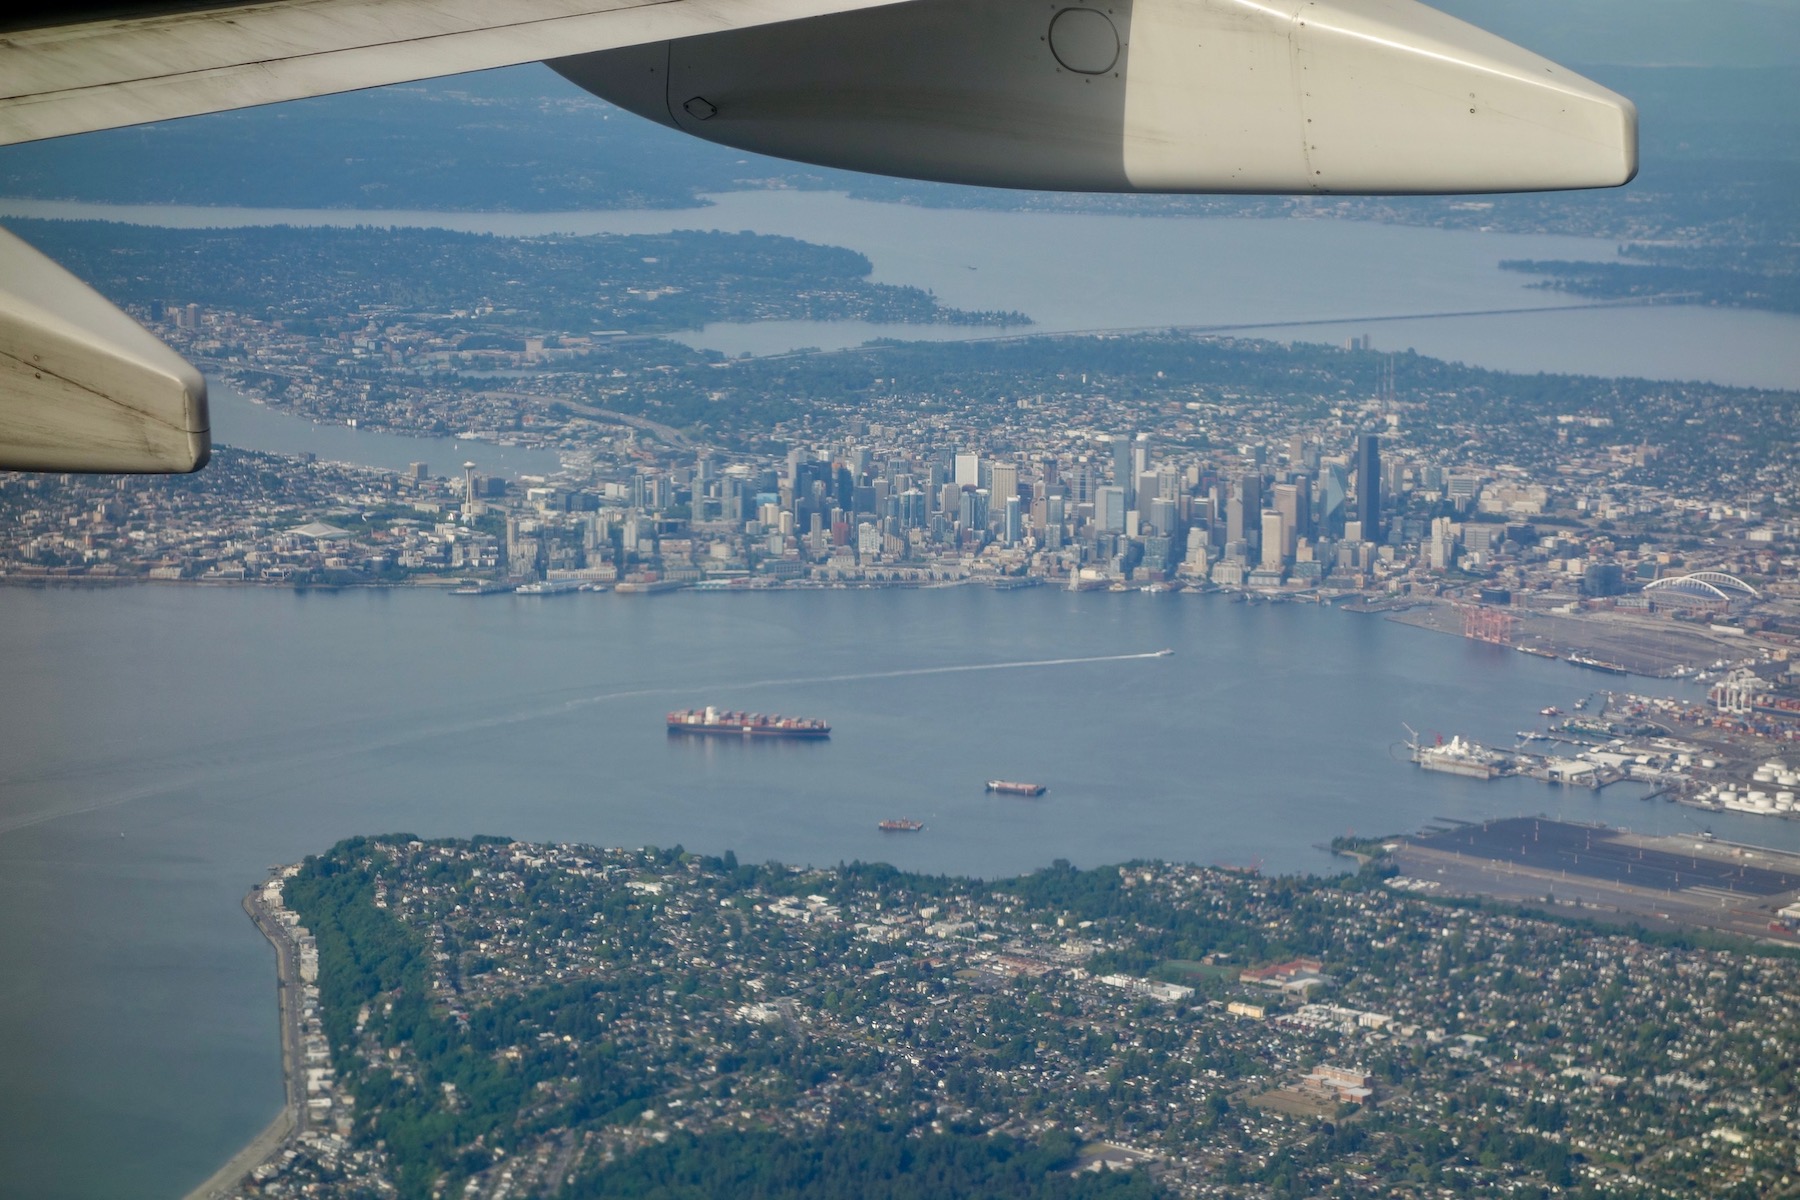 In an aerial photo, Seattle's downtown skyscrapers and its surrounding neighborhoods lie below the flap fairings under a jet wing. Elliott Bay and Duwamish Head are in the foreground, while Lake Washington stretches across the background.